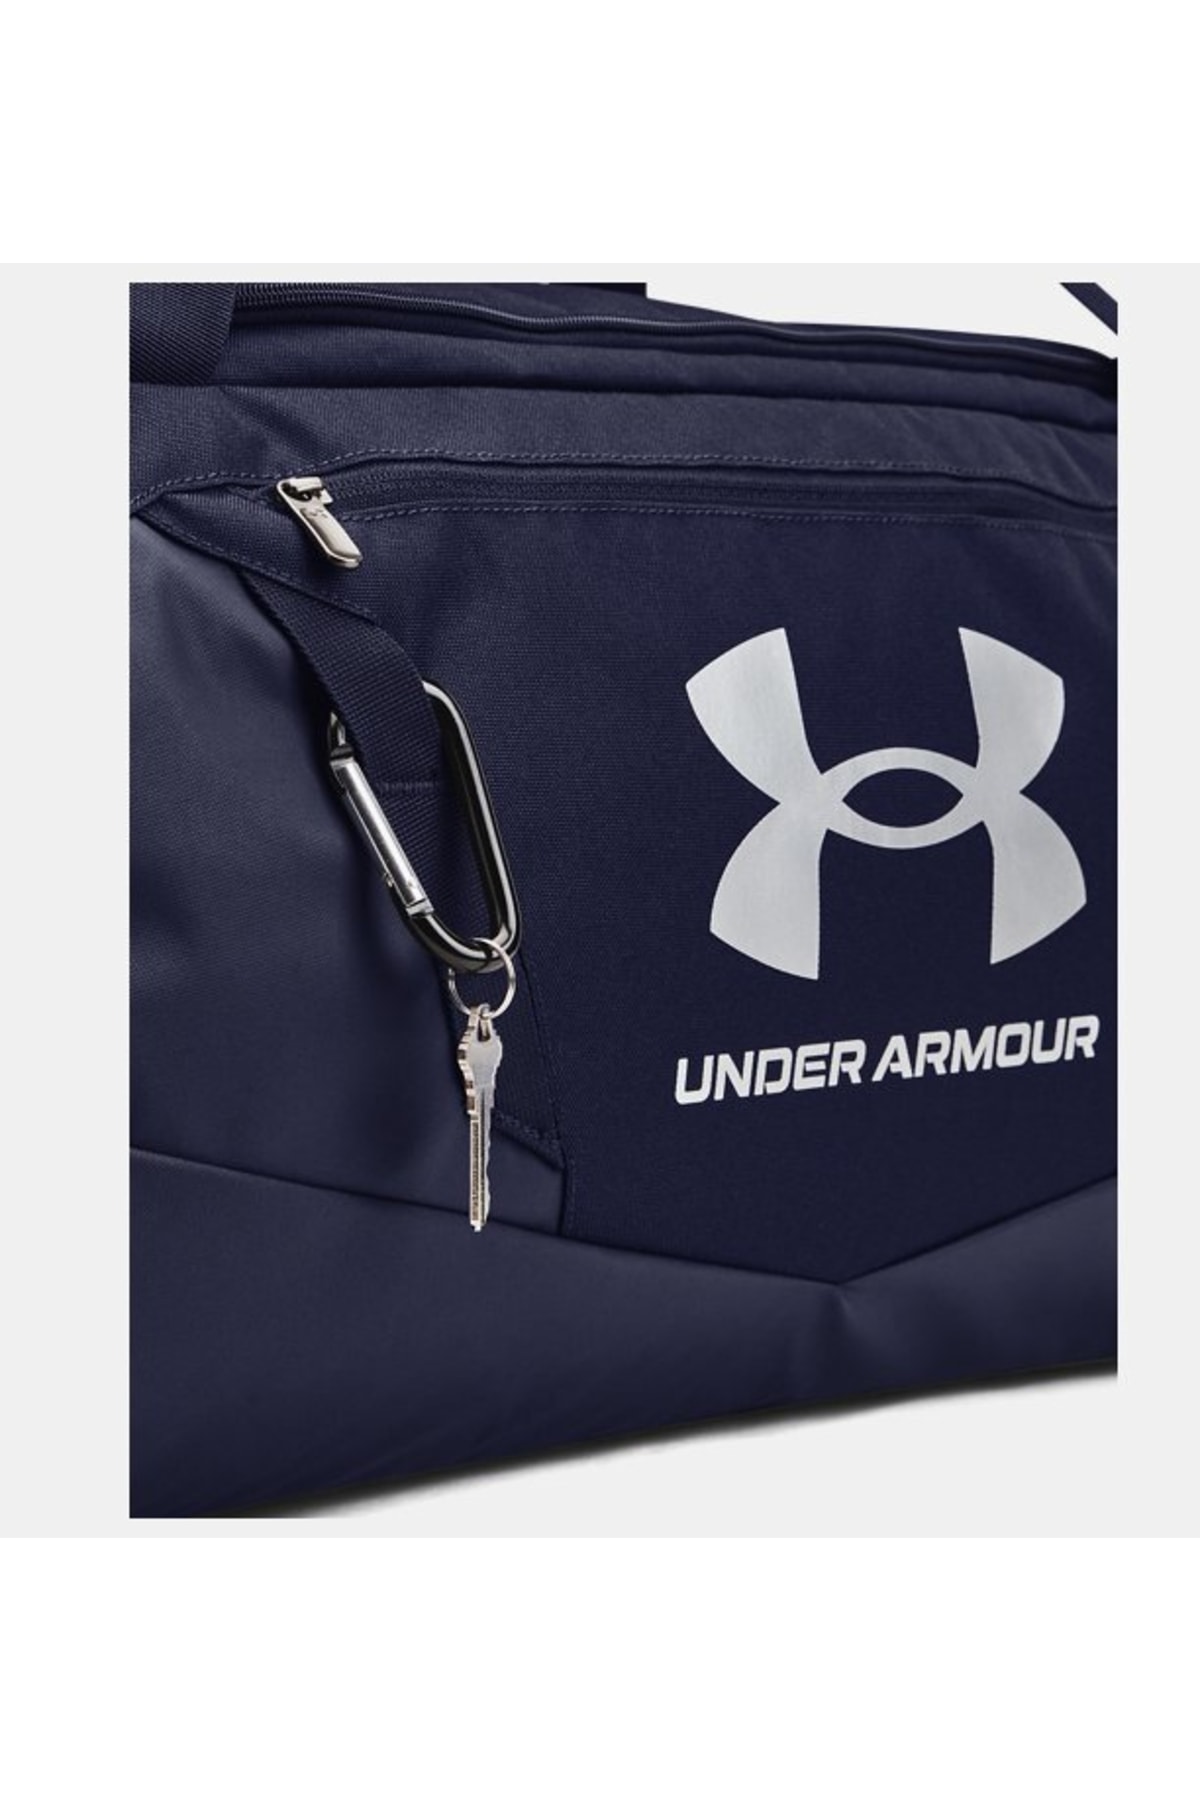 Under Armour UA undenibable 5.0 MD Cylinder Bag 1369223-410